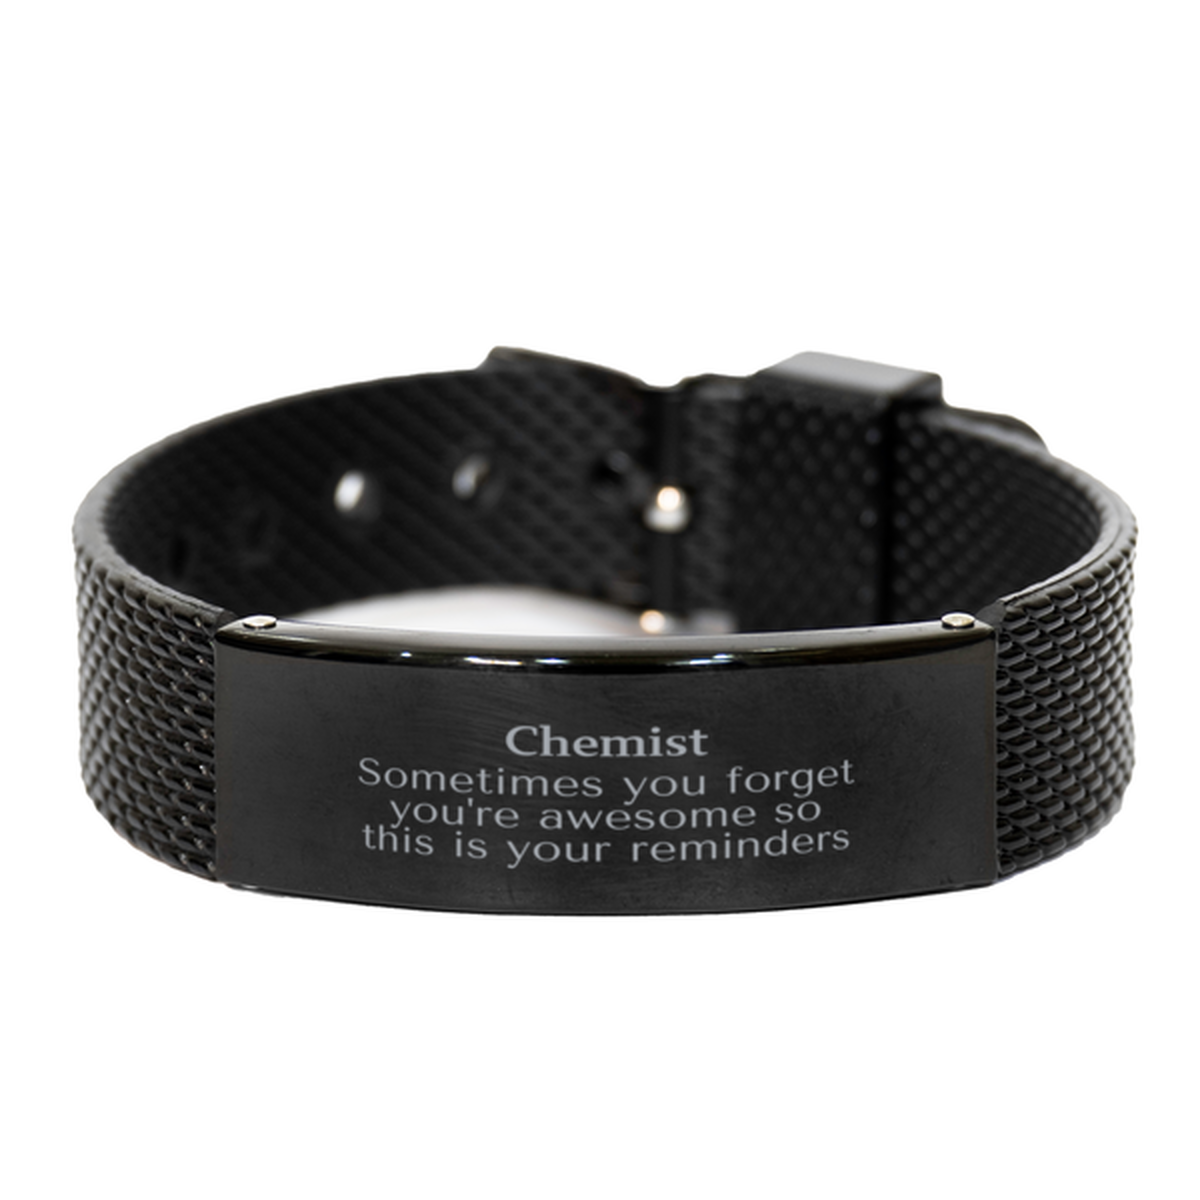 Sentimental Chemist Black Shark Mesh Bracelet, Chemist Sometimes you forget you're awesome so this is your reminders, Graduation Christmas Birthday Gifts for Chemist, Men, Women, Coworkers